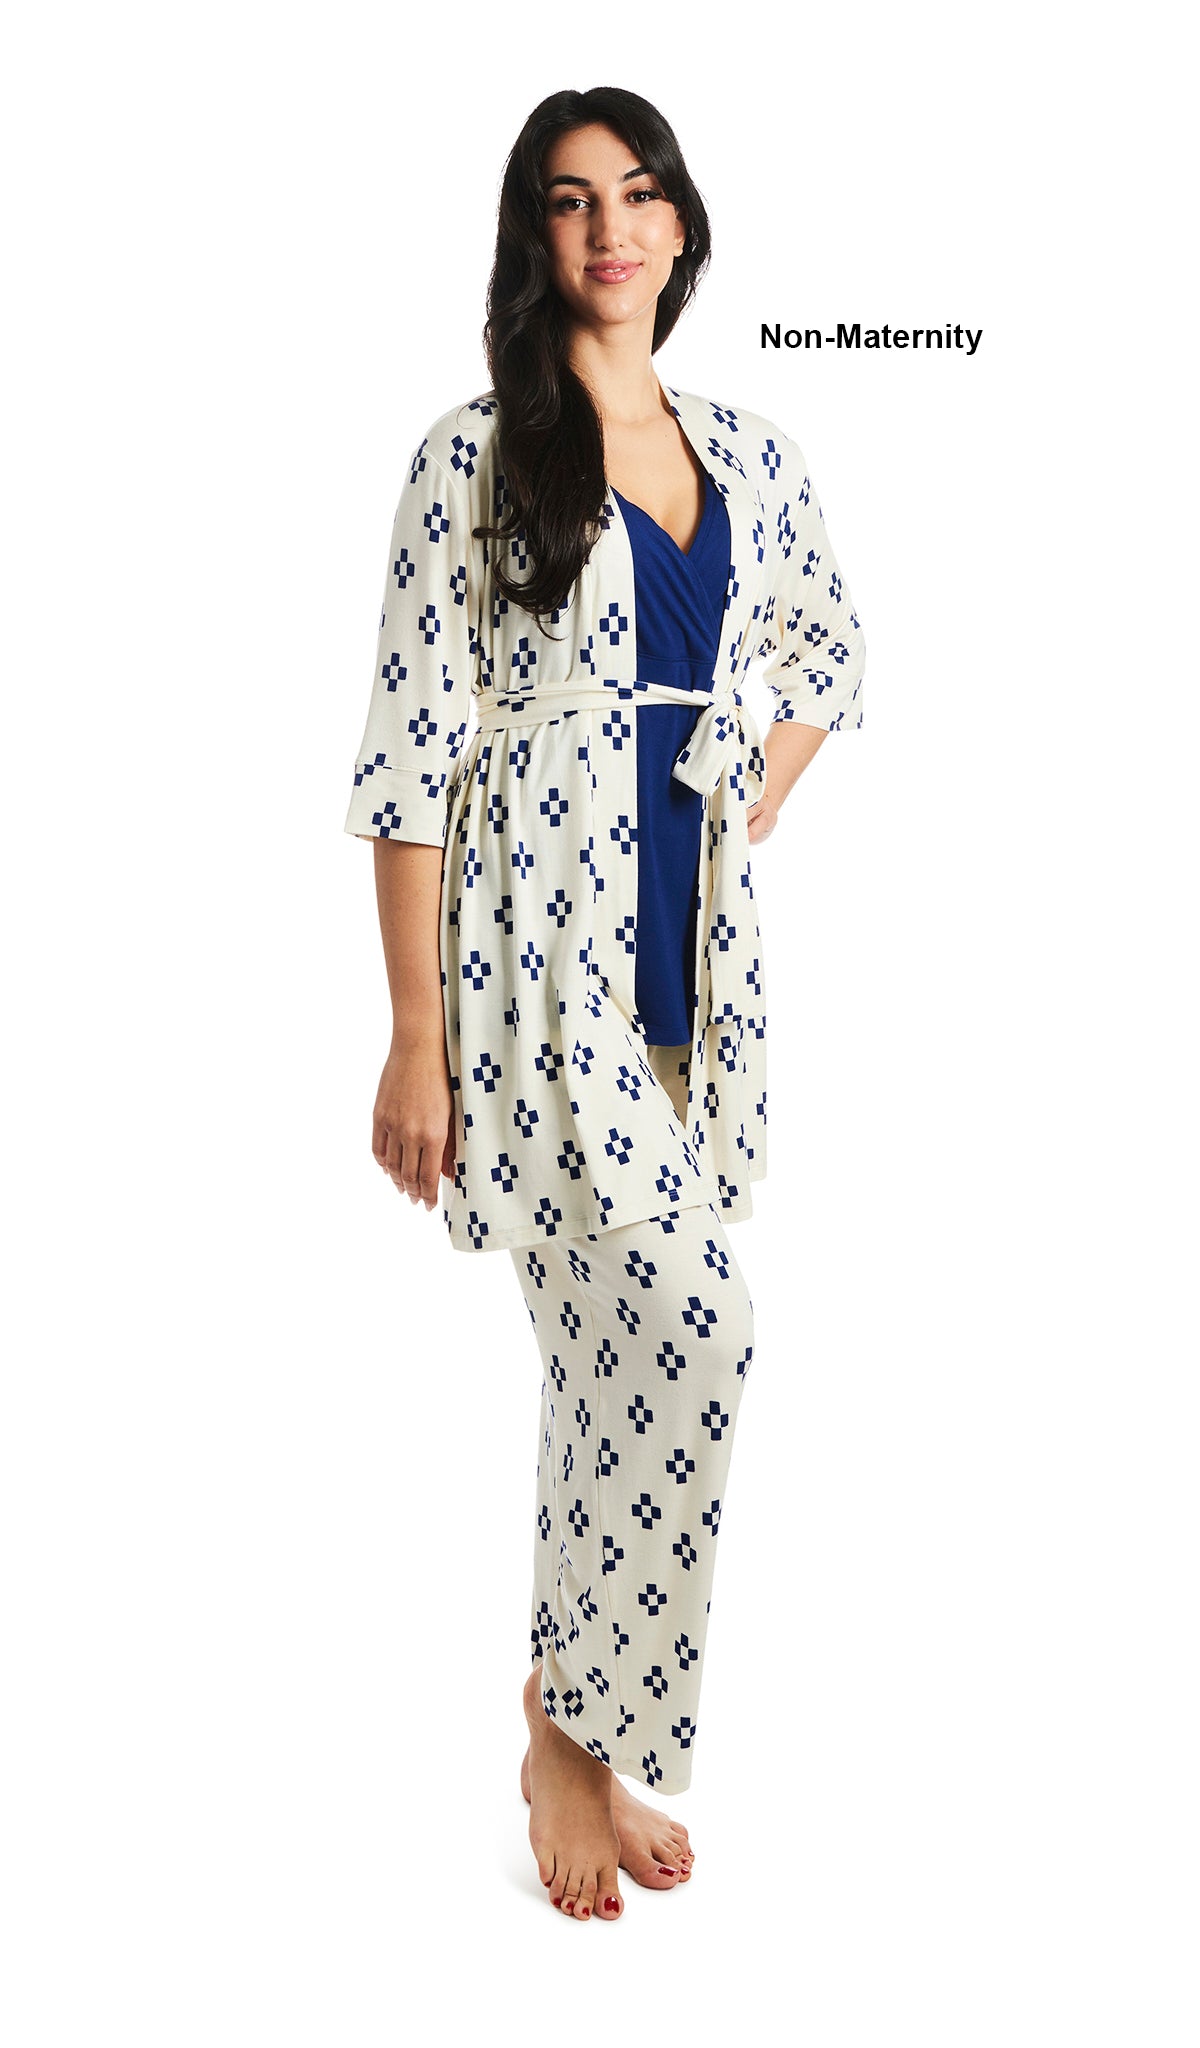 Geo Analise 3-Piece Set. Woman with hand on hip wearing 3/4 sleeve robe, tank top and pant as non-maternity.